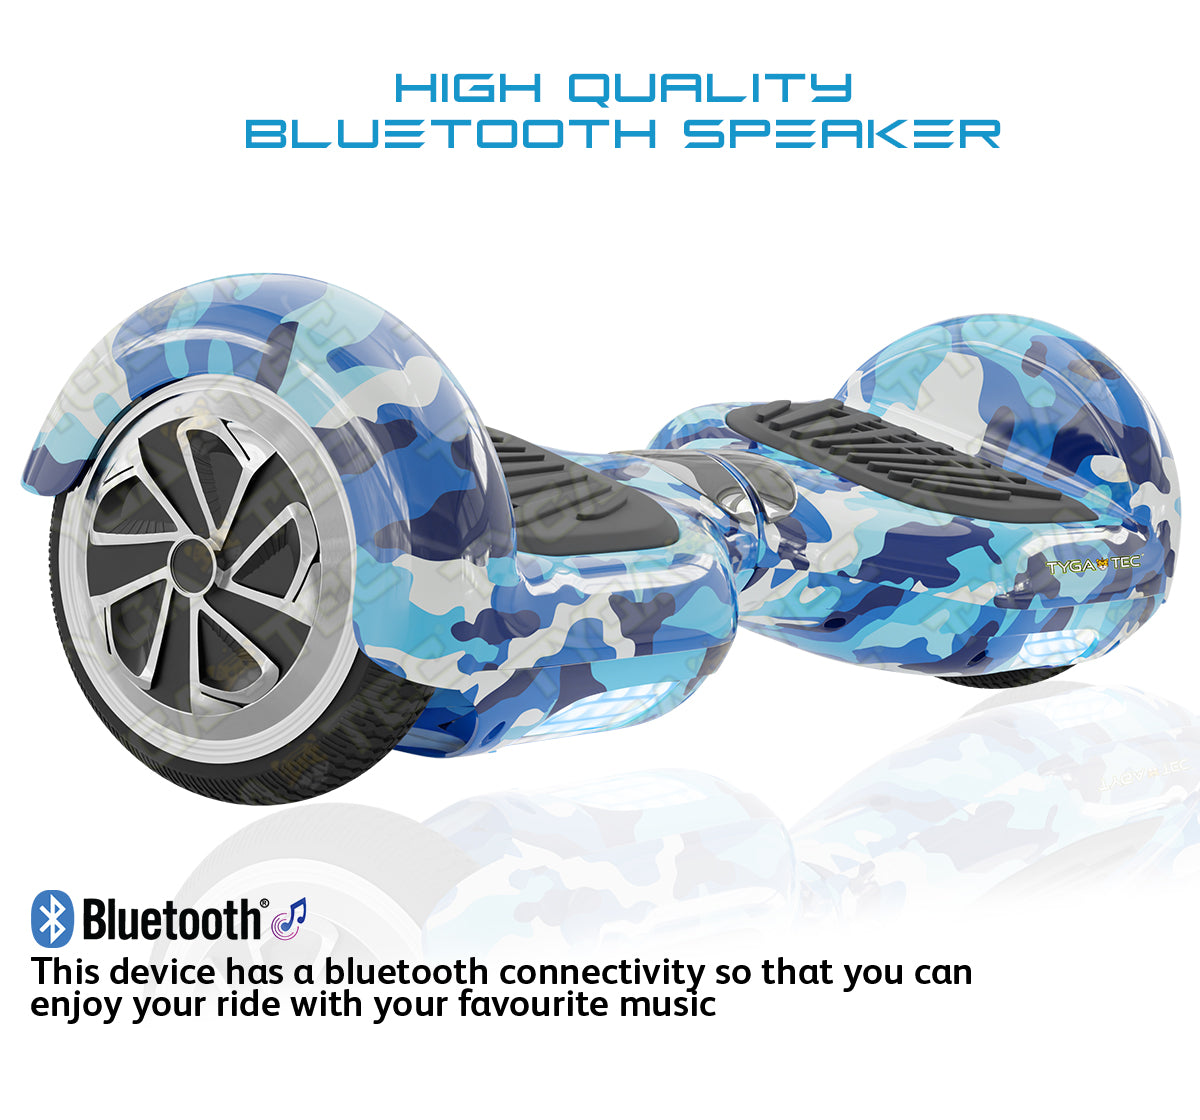 Tygatec T1 ECO - Self Balancing Electric Hoverboard (Military Blue)